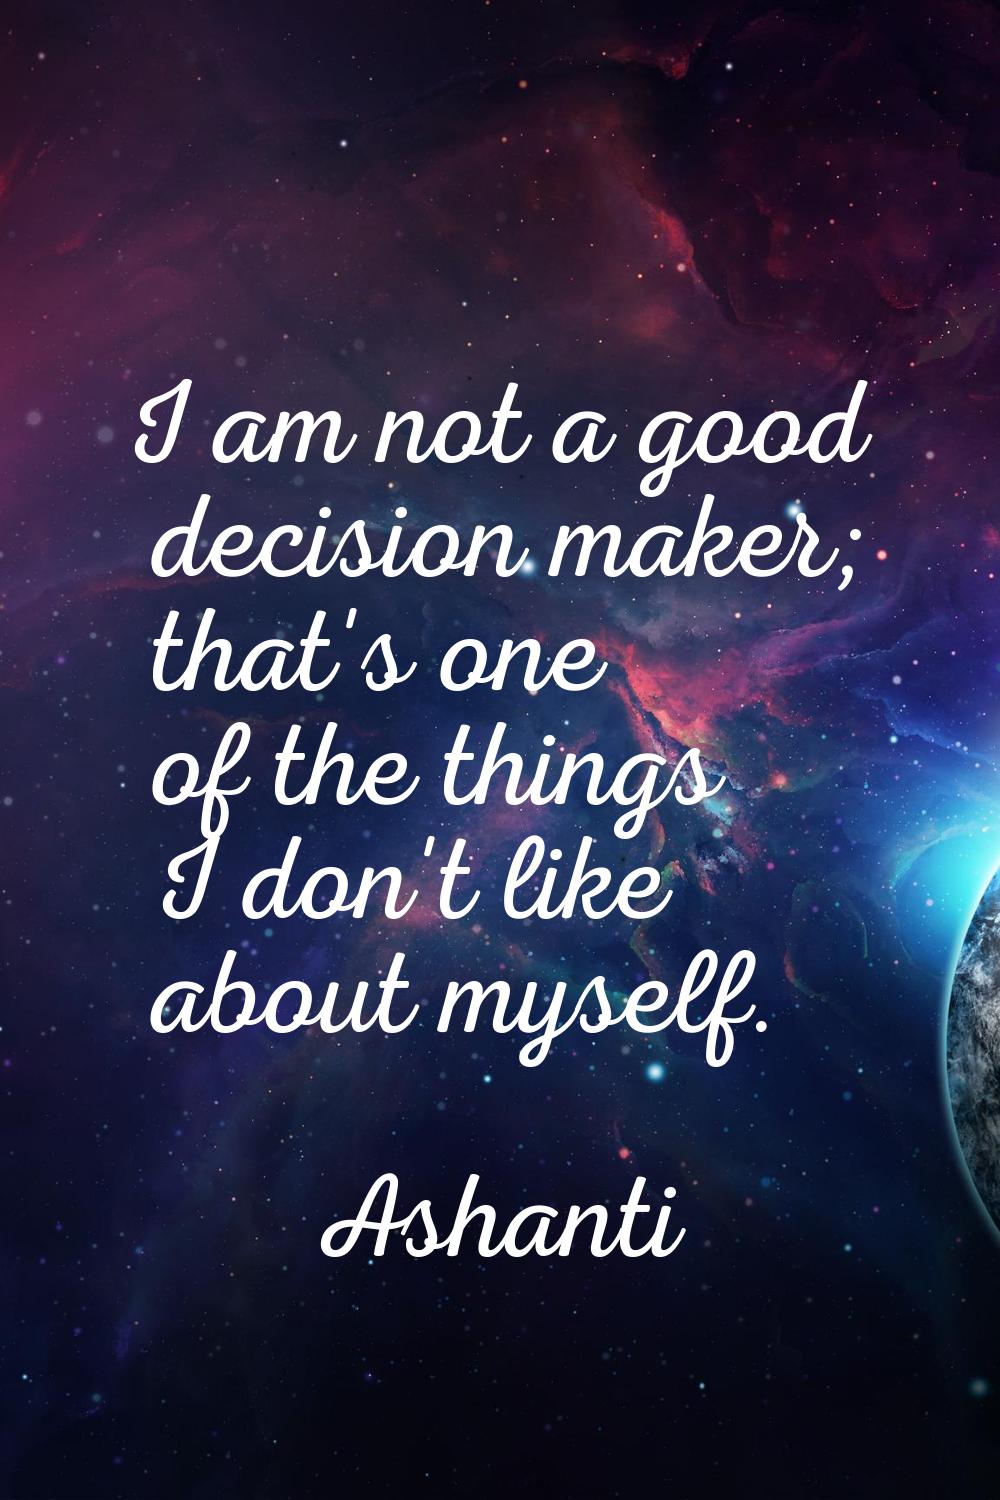 I am not a good decision maker; that's one of the things I don't like about myself.